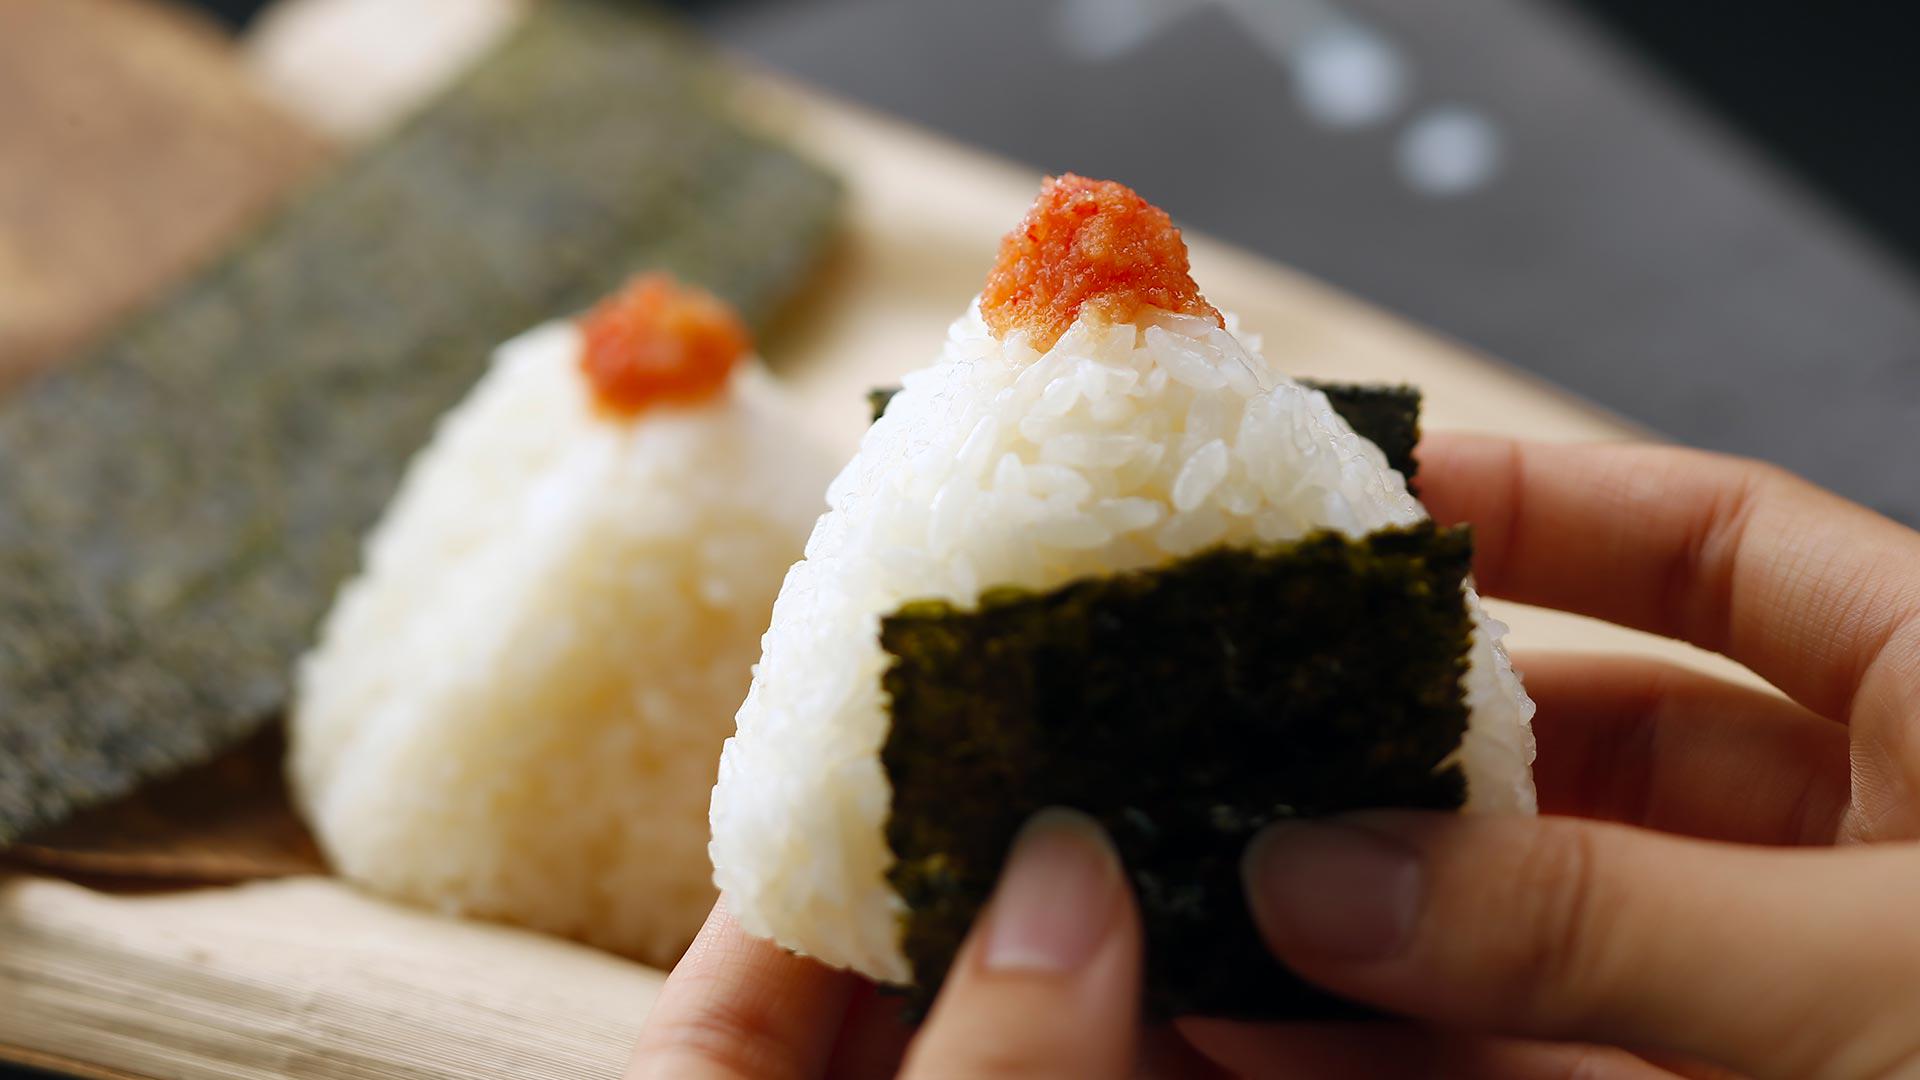 All About Onigiri | Experiences, Restaurants, Products and More| byFood